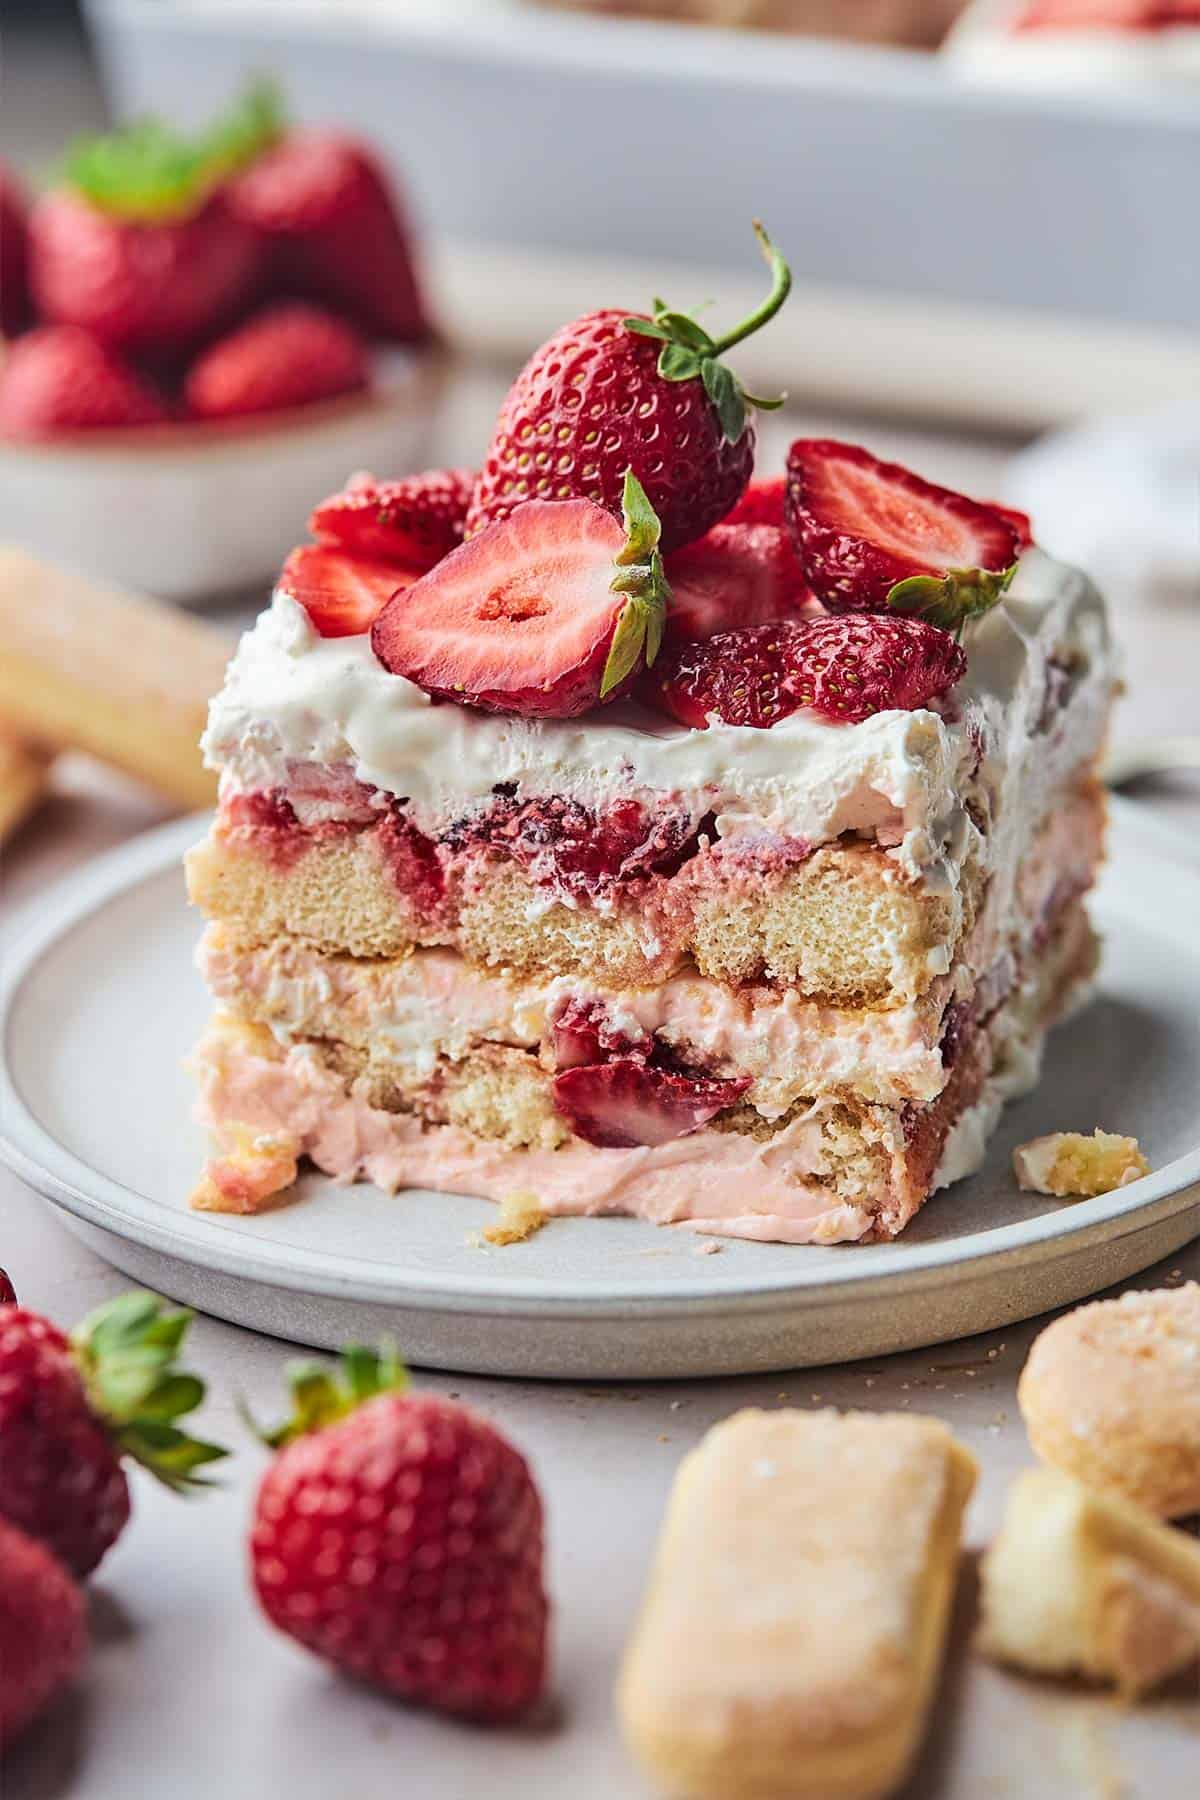 A square of strawberry tiramisu on a plate topped with a whole strawberry and some sliced.